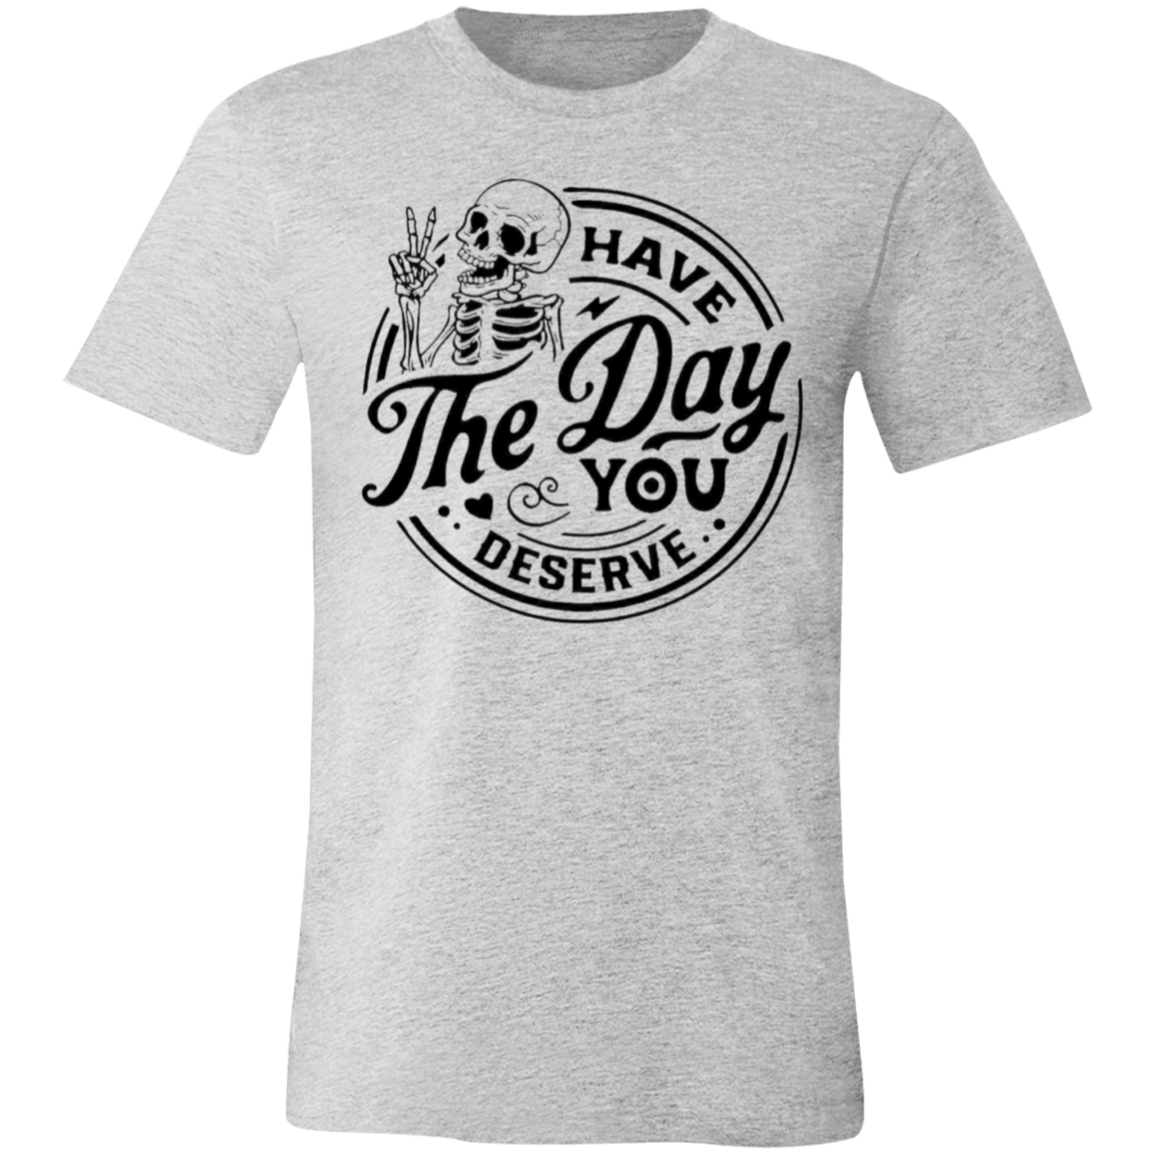 Have the Day You Deserve 3001C Unisex Jersey Short-Sleeve T-Shirt